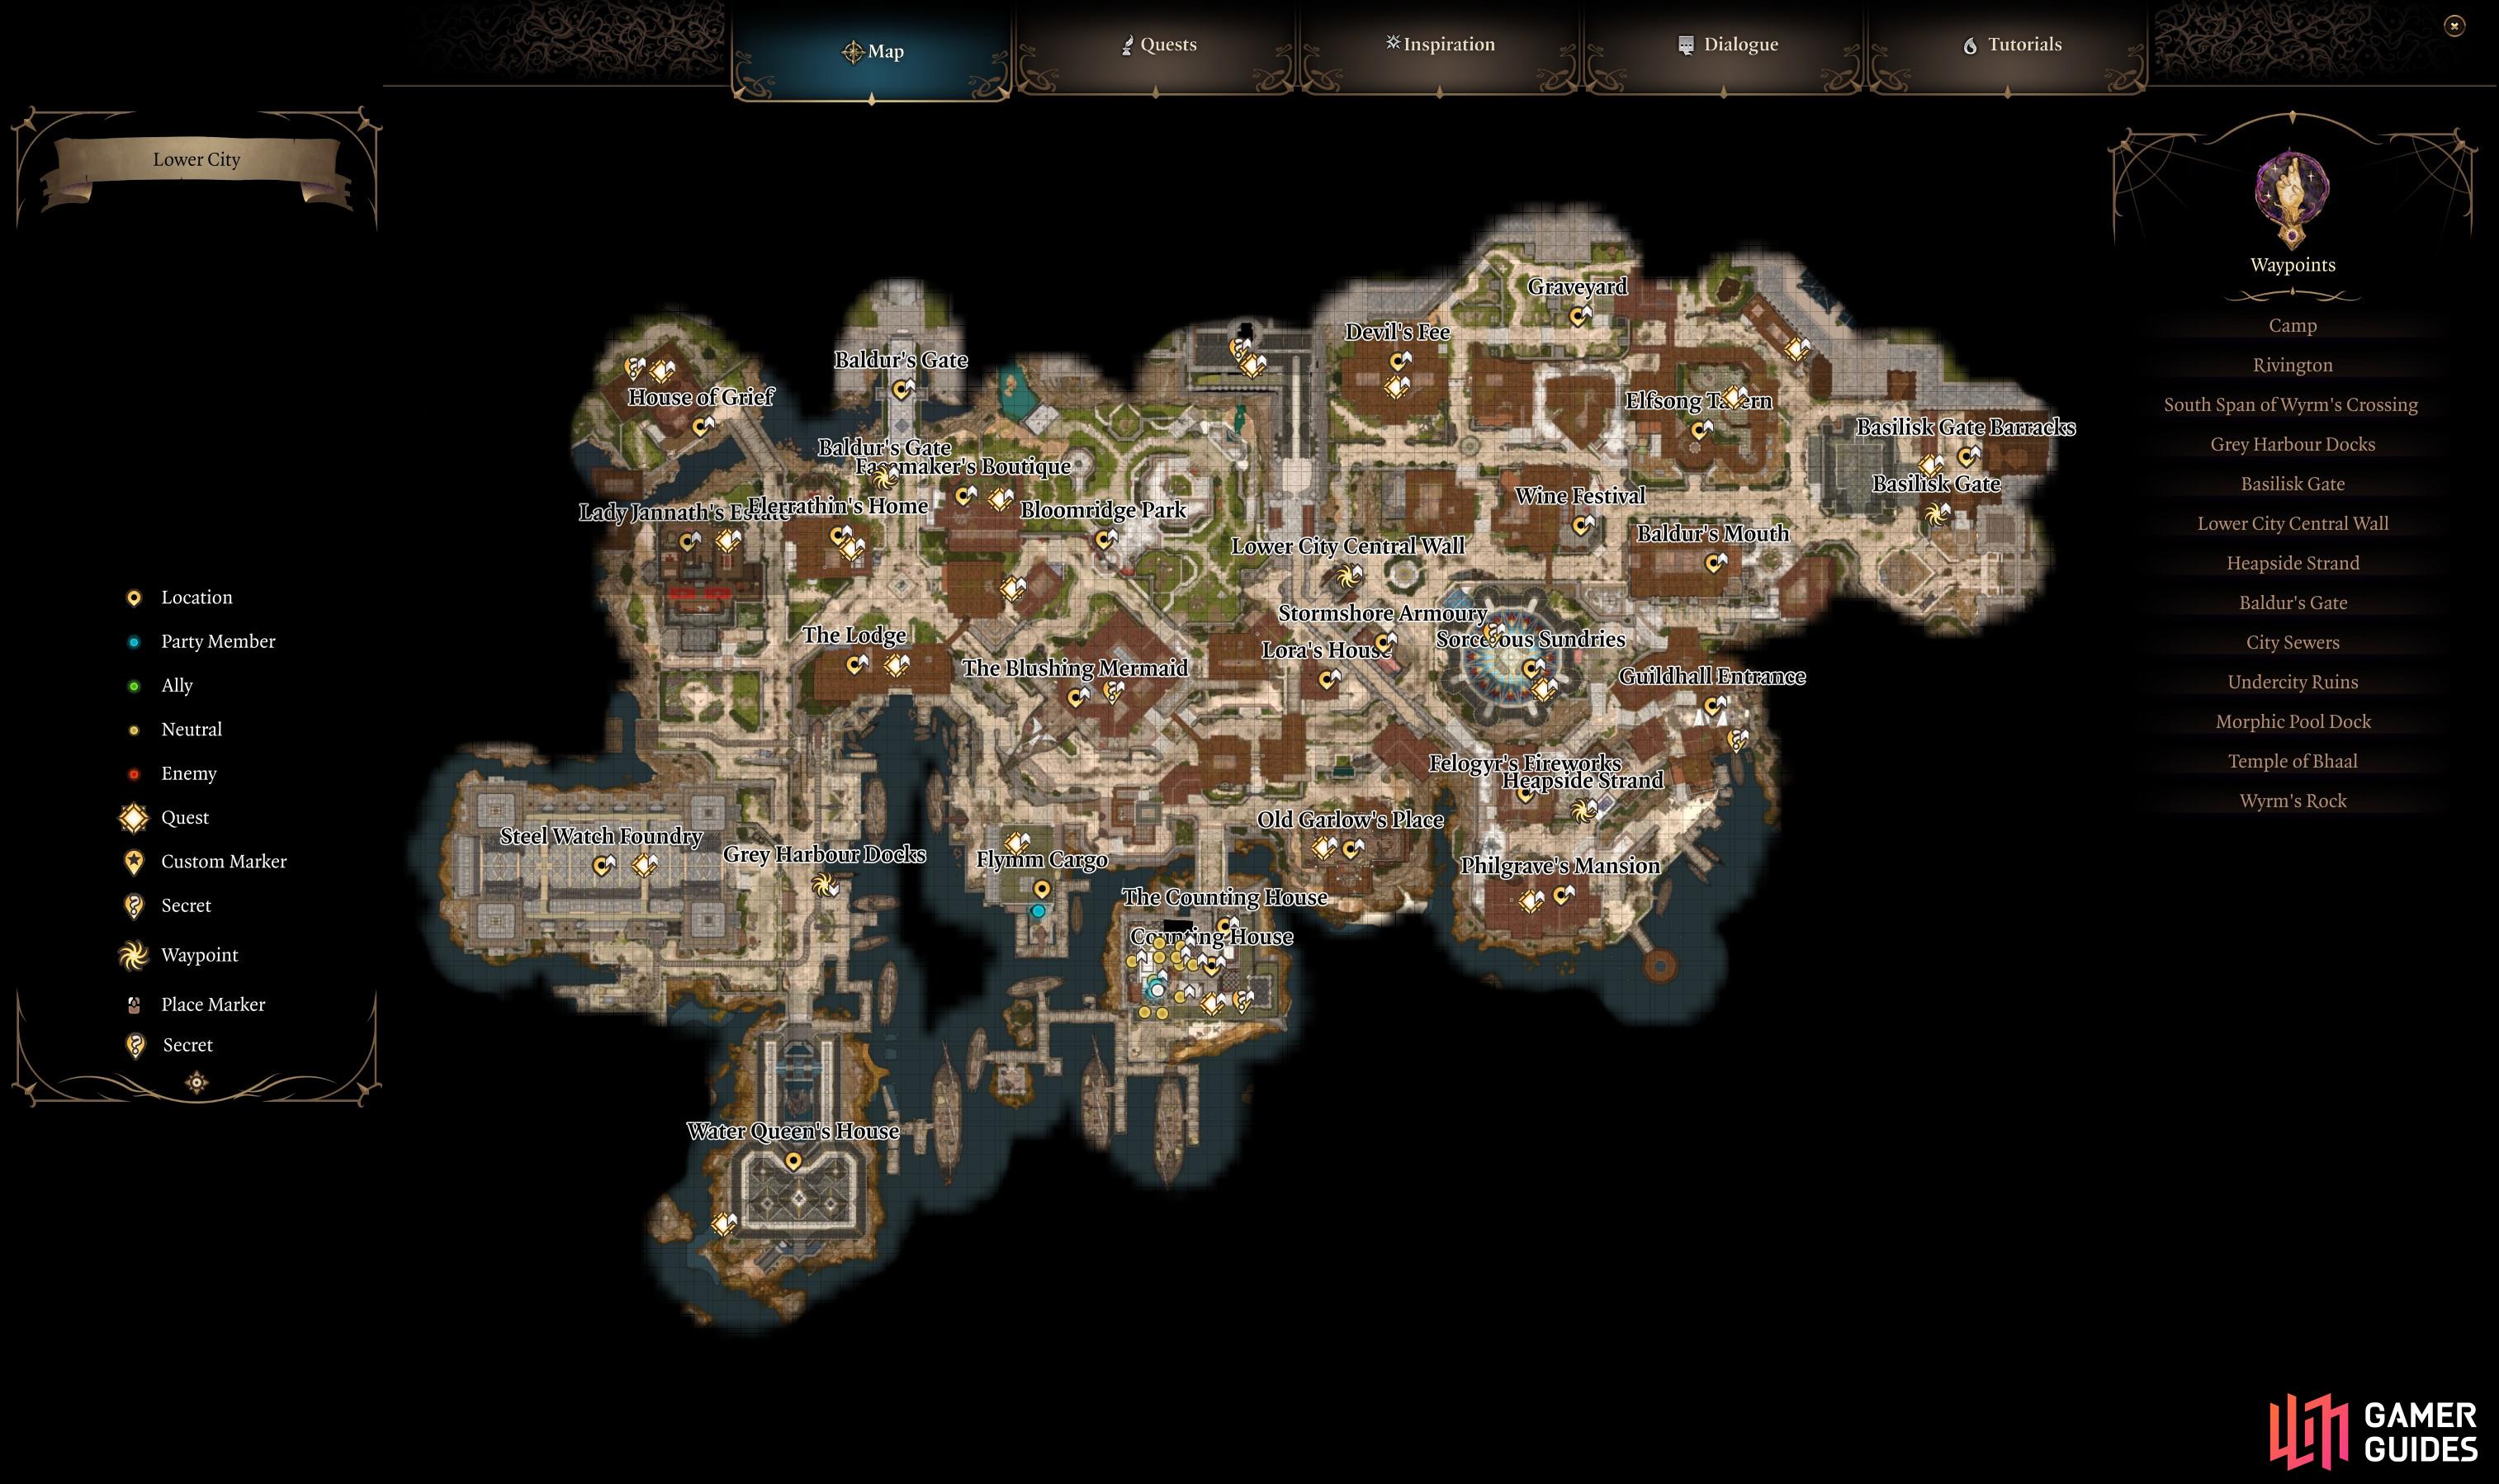 A Map of the Lower City in Baldur’s Gate 3